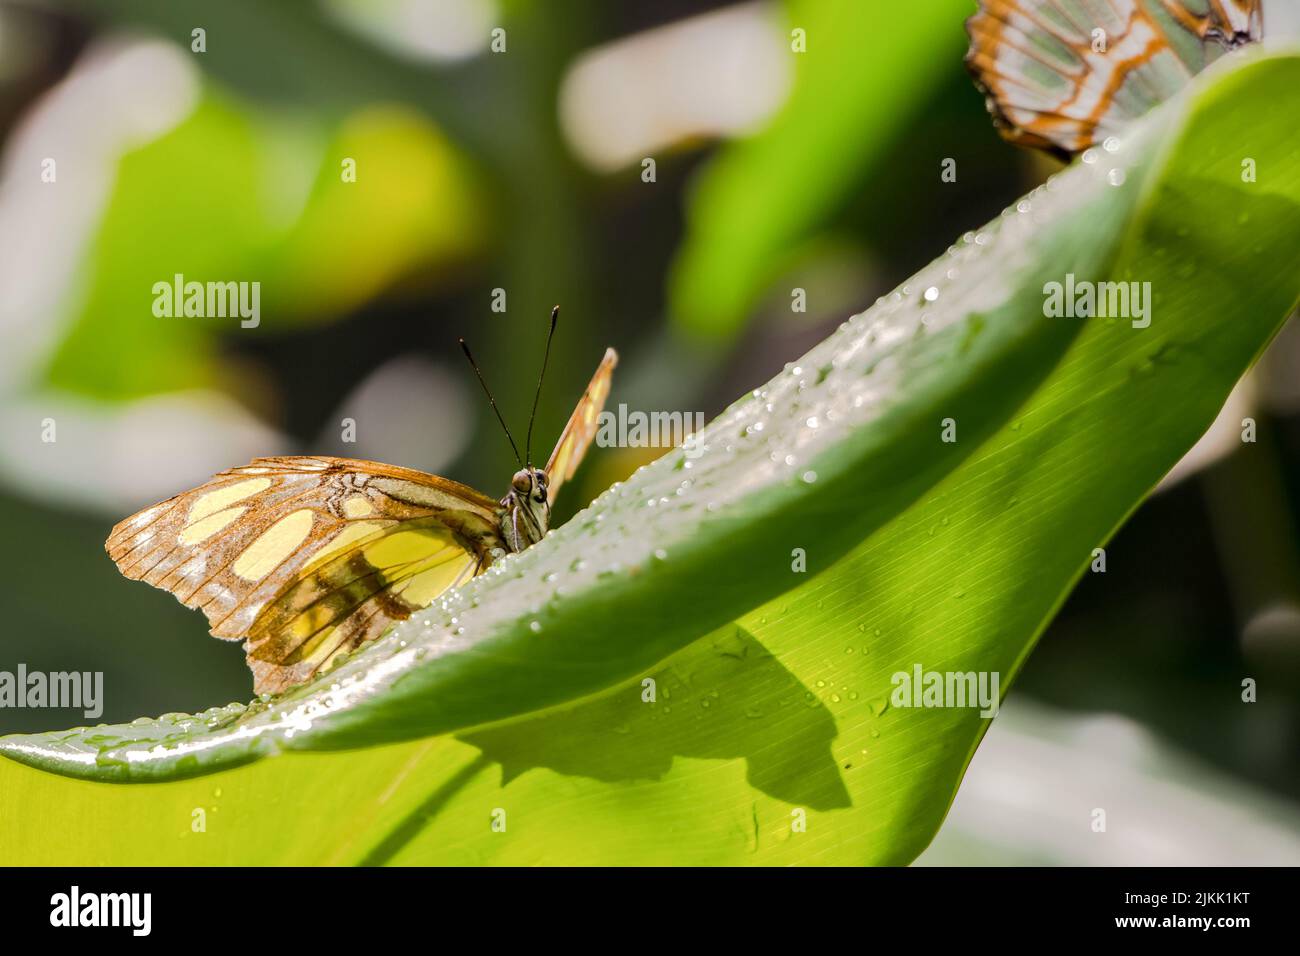 A shallow focus shot of two malachite butterflies standing on a green plant leaf in bright sunlight with blurred background Stock Photo